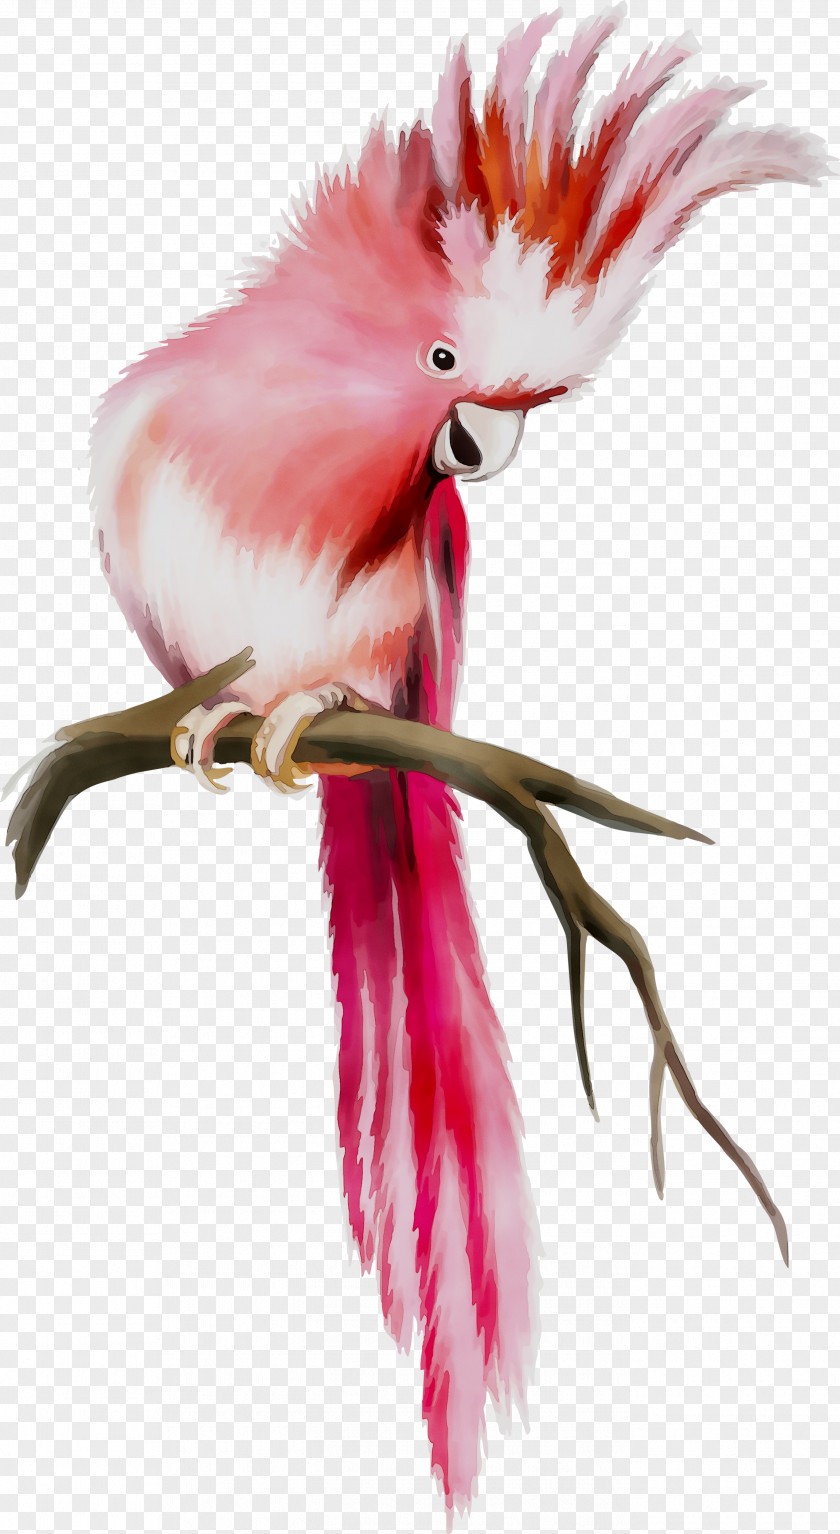 Illustration Feather Beak Chicken As Food PNG